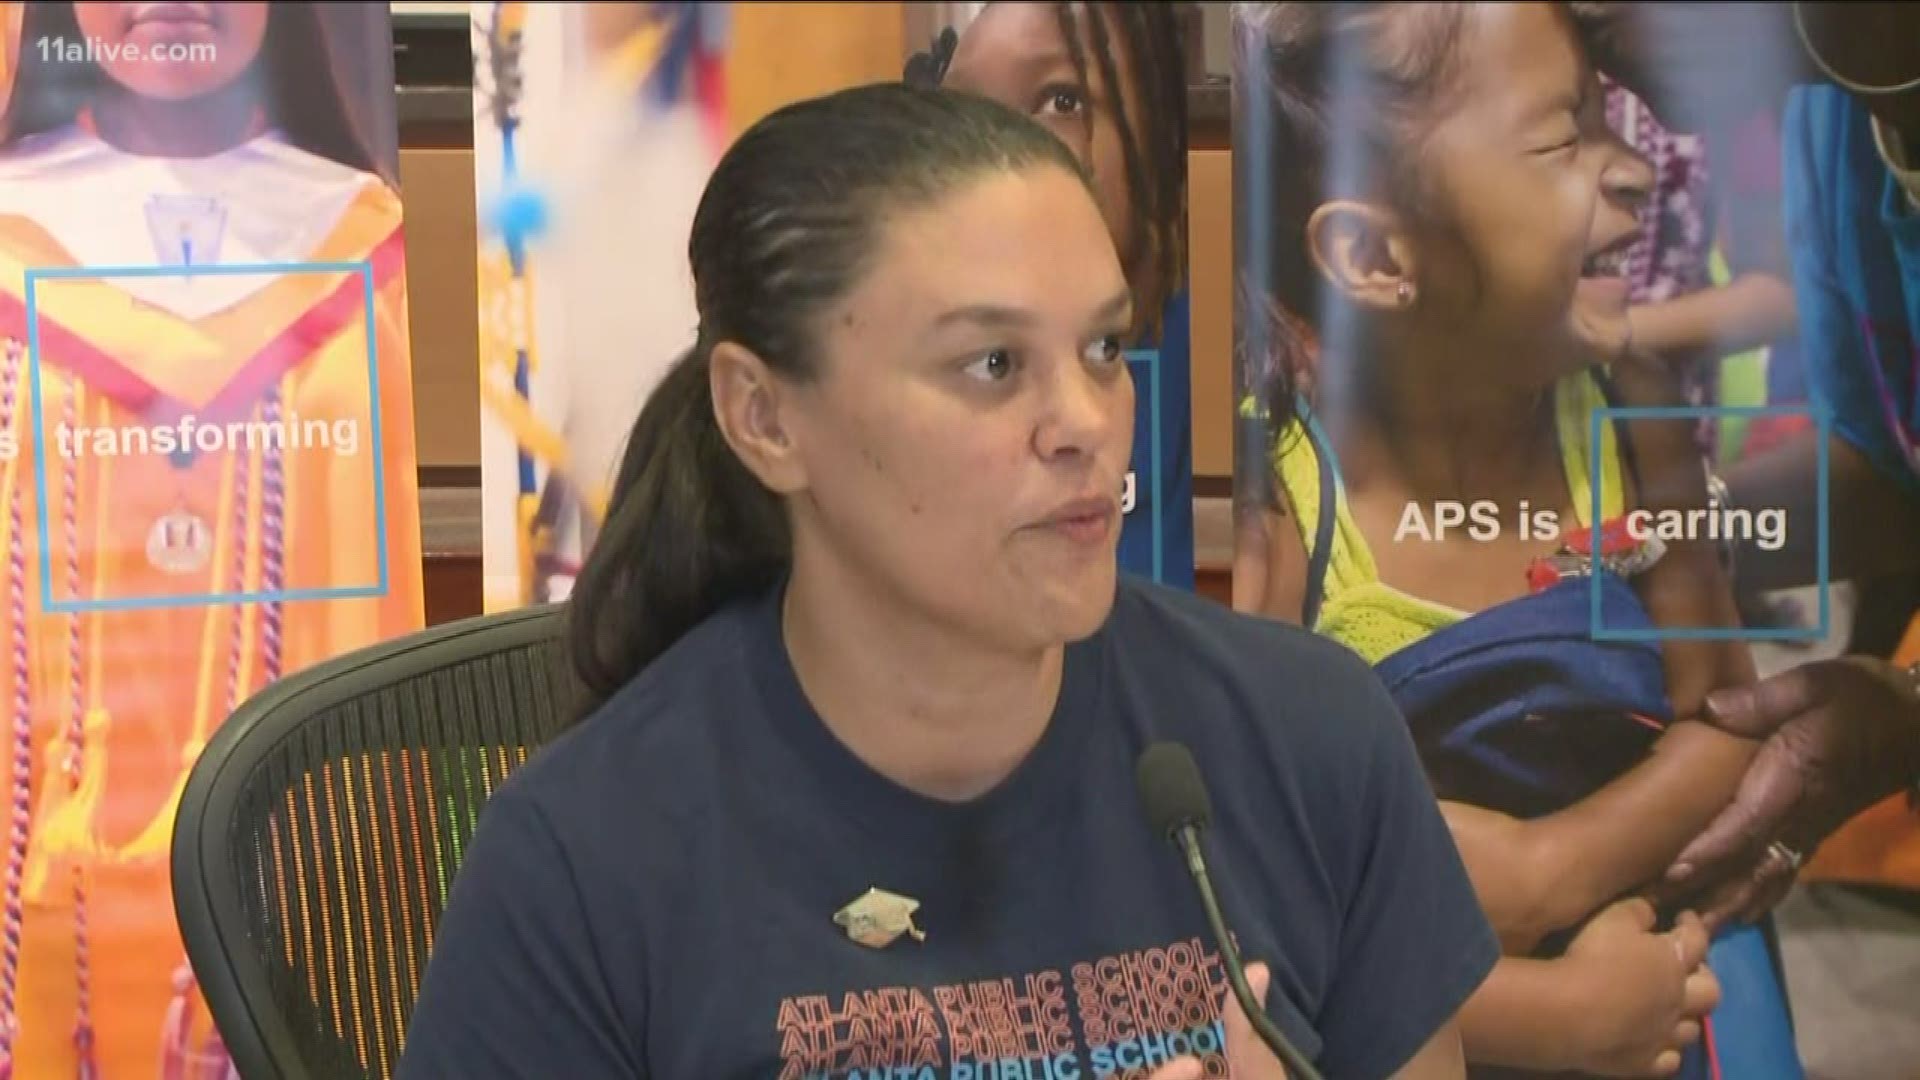 Days after the Atlanta Public Schools board decided they will not renew the contract of Superintendent Meria Carstarphen when it expires, she spoke to the media saying regardless of their decision, there is more work to be done.